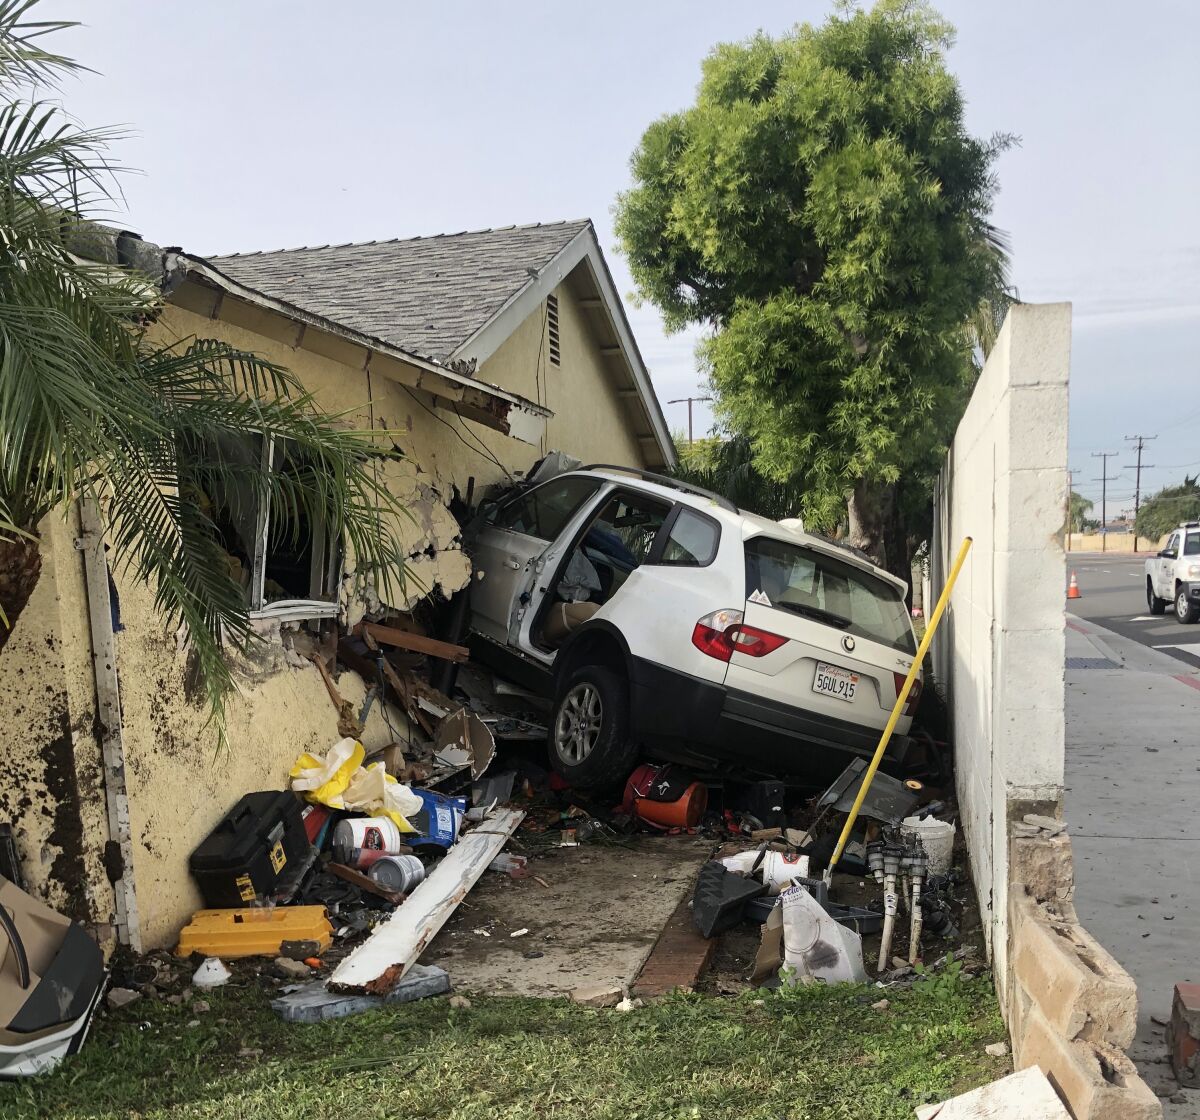 An SUV plowed through the side of this house on Fountain Lane in Huntington Beach on Friday morning.